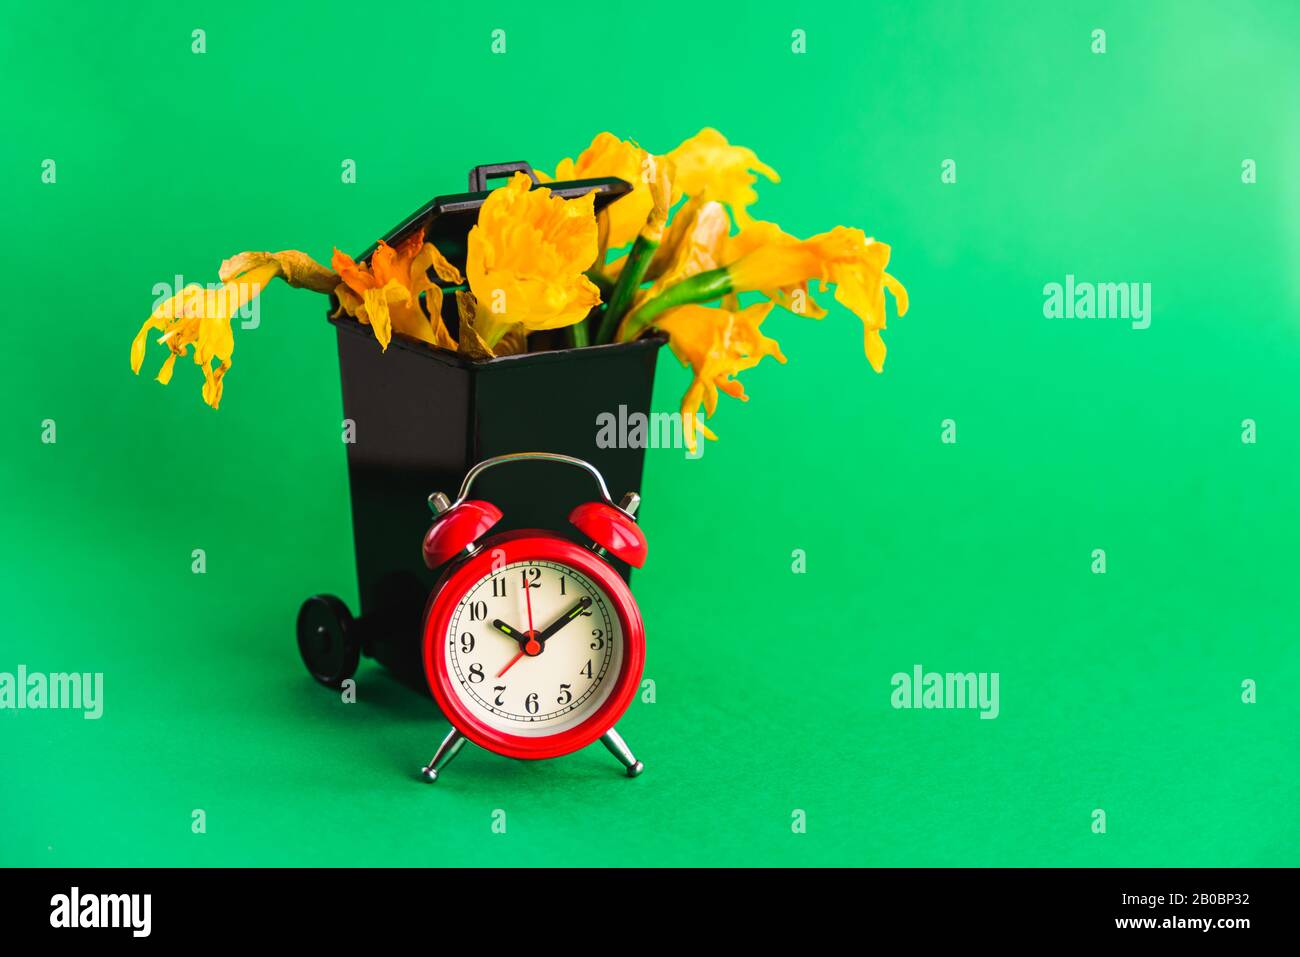 Black Dumpster with wilted narcissus flowers bouquet and red old style clock. Dead, aging concept. Disposable gift. Green background Stock Photo